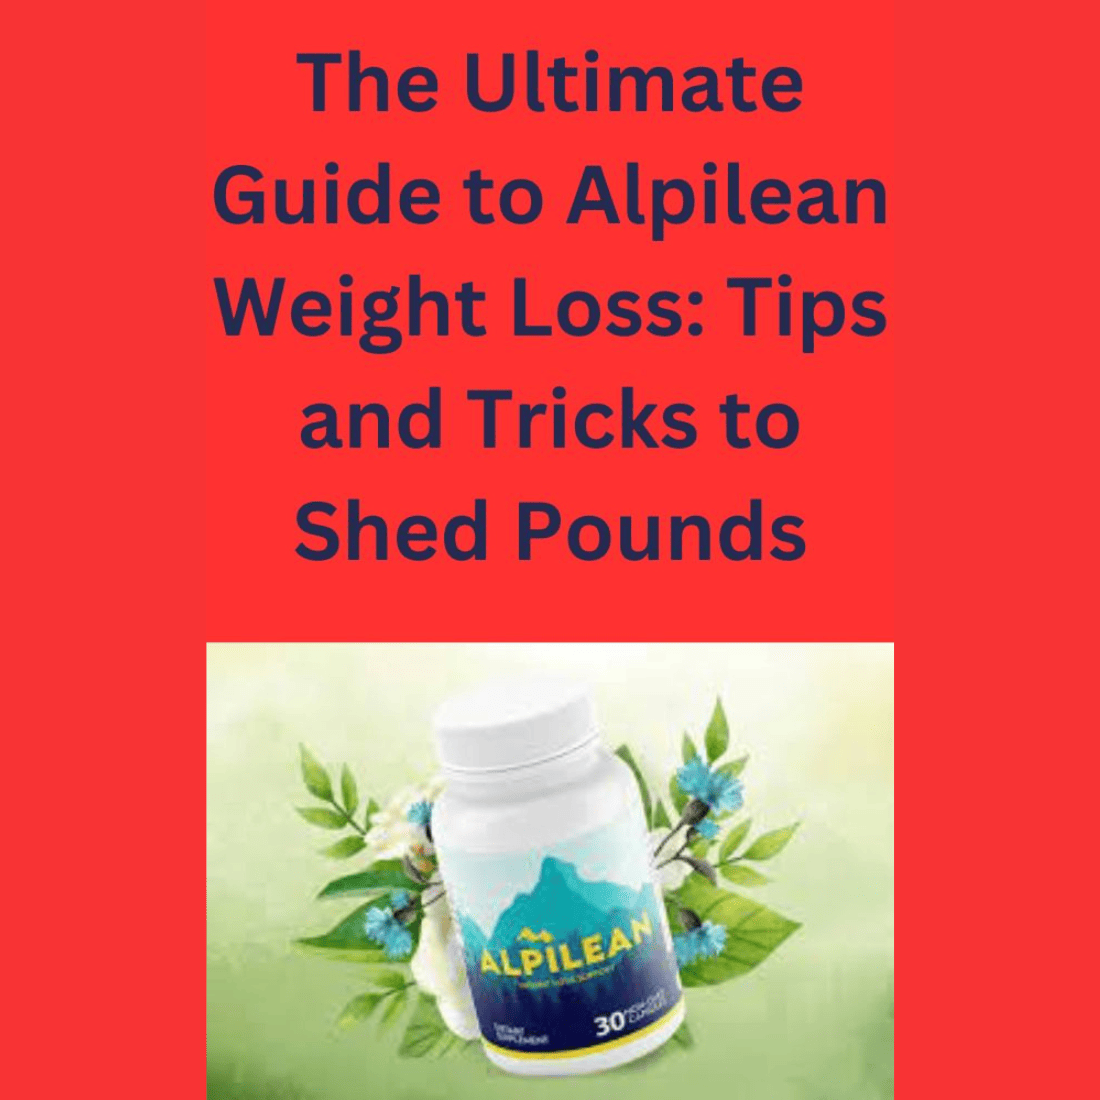 The Ultimate Guide to Alpilean Weight Loss: Tips and Tricks to Shed Pounds preview image.